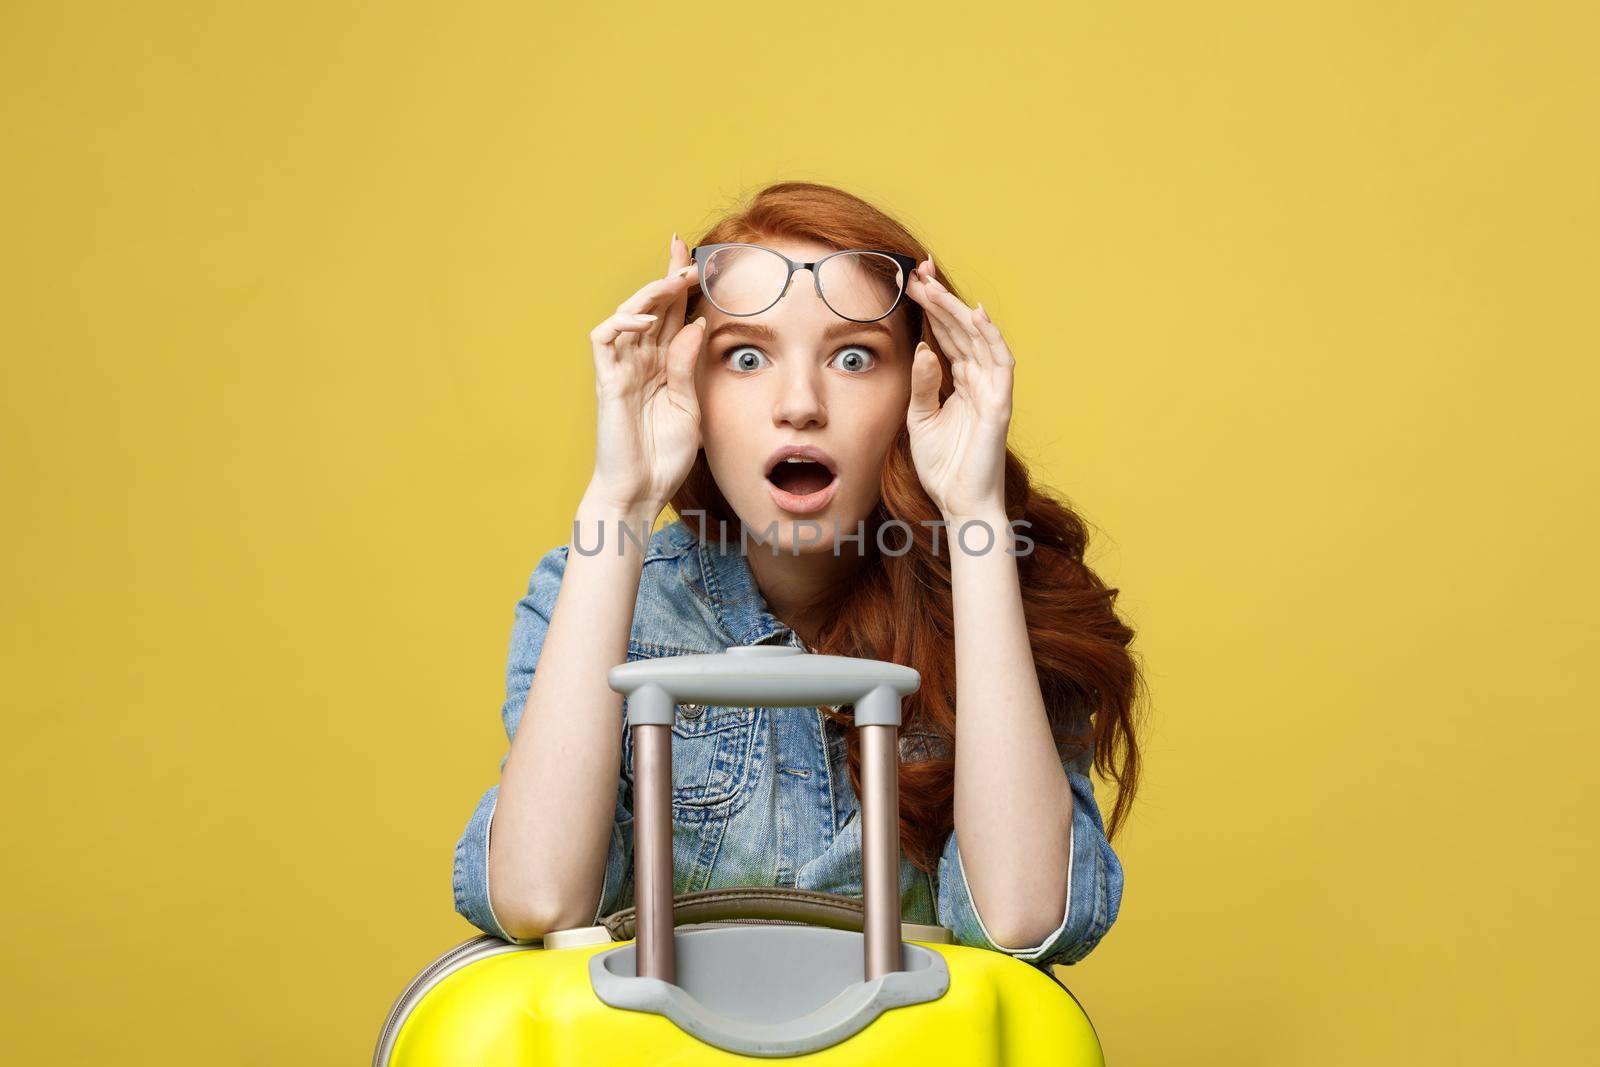 Travel and Lifestyle Concept: Portrait of a shocked girl in denim dress with suitcase looking at camera isolated over golden yellow background.